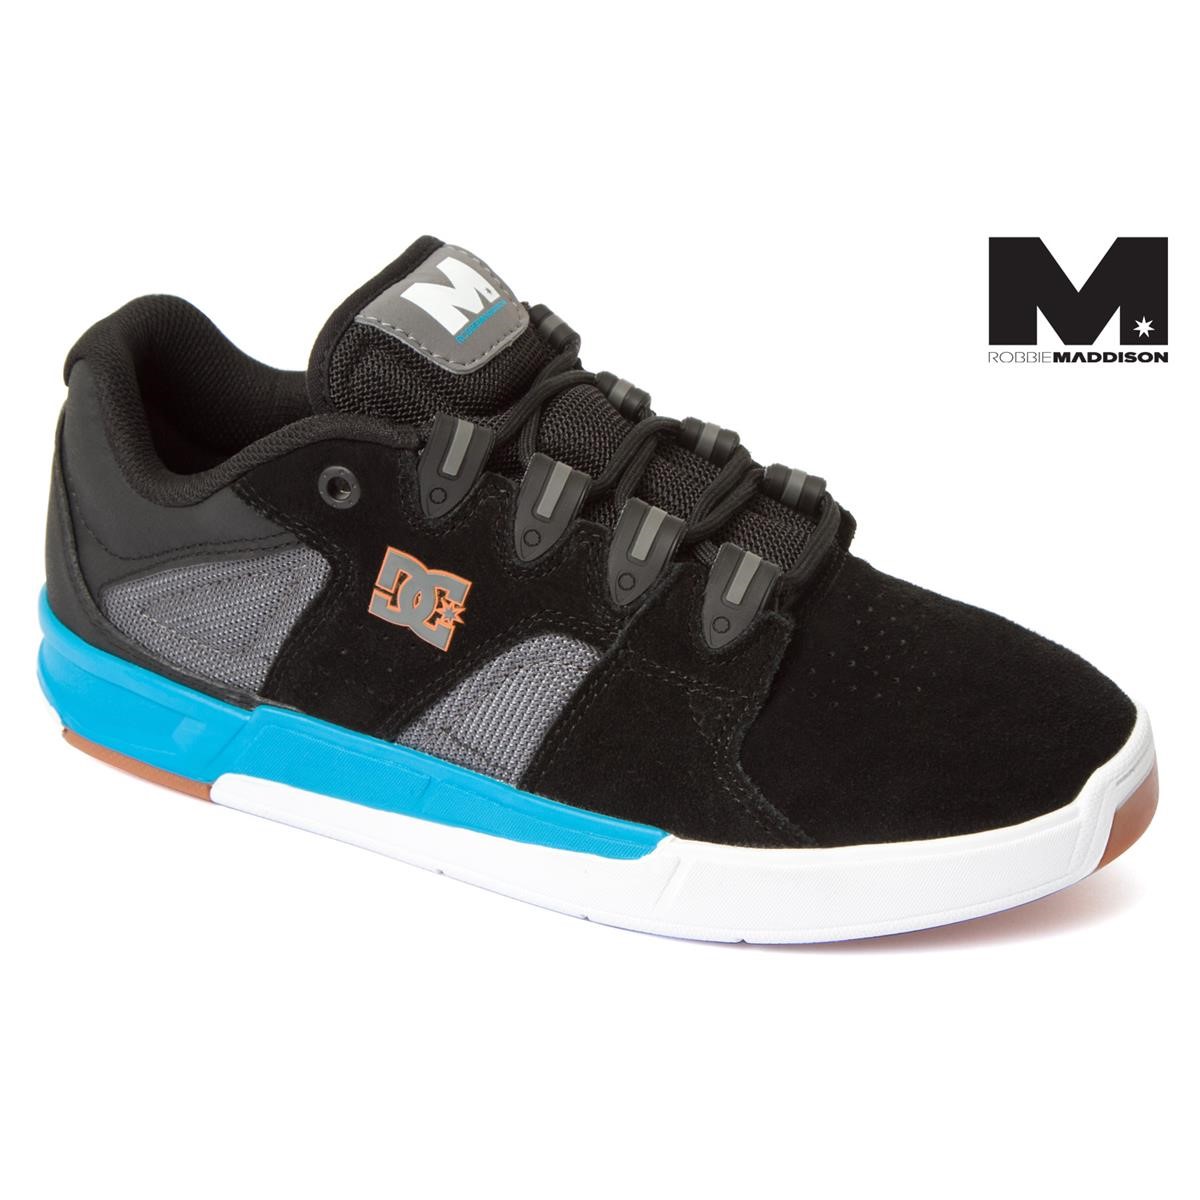 DC Chaussures Maddo - Robbie Maddison Black/Turquoise